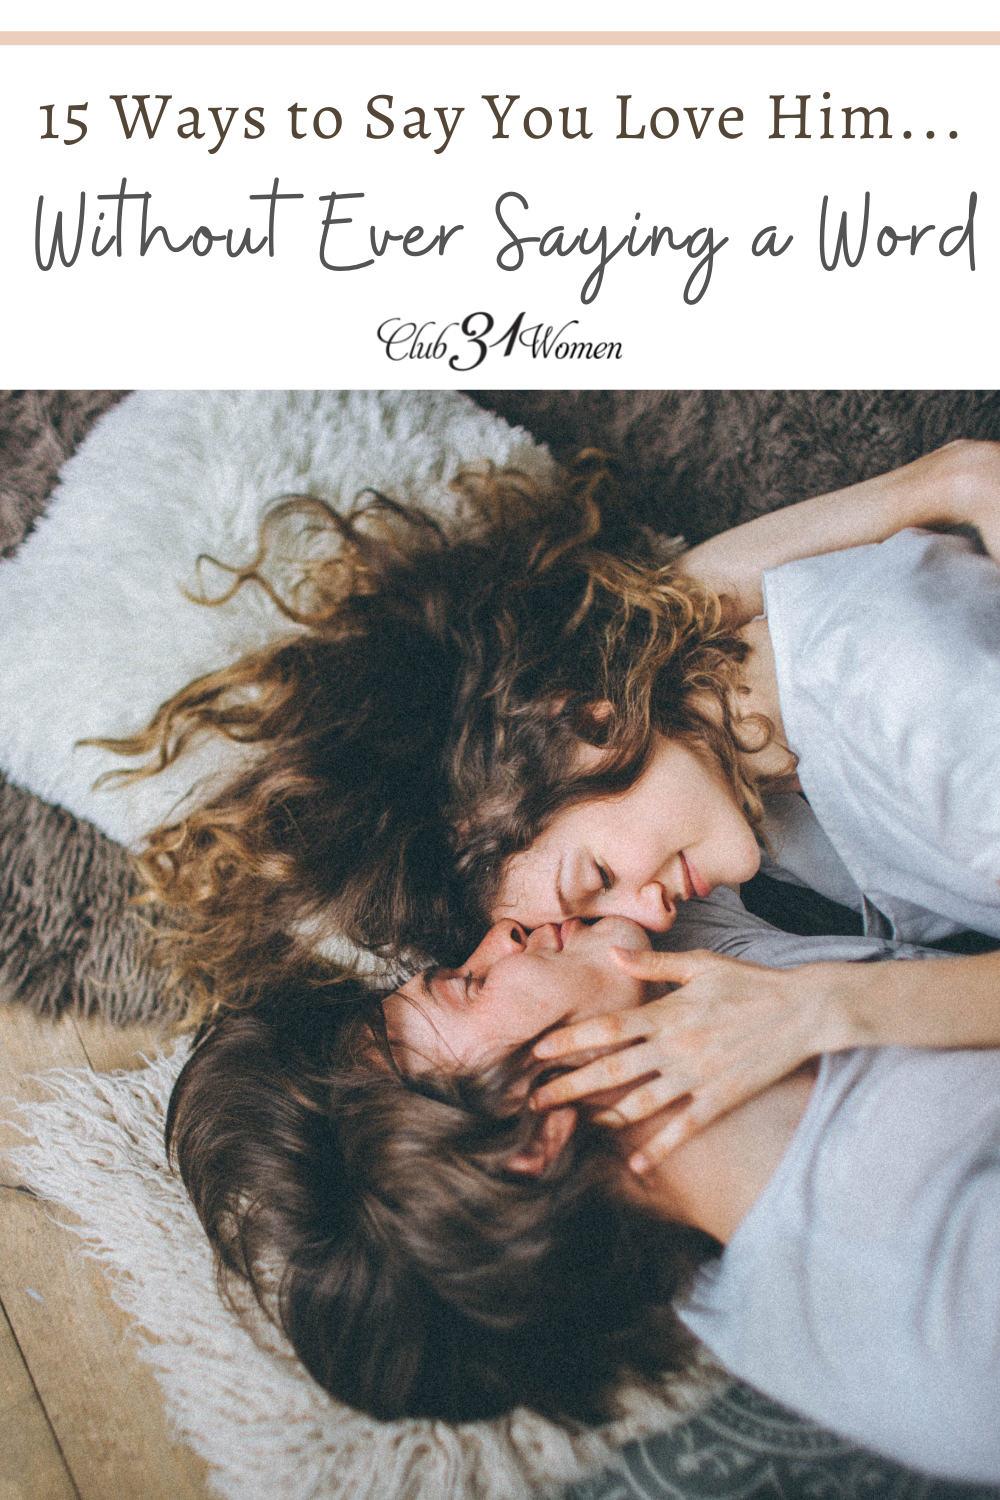 Did you know that there are some powerful ways to tell your man that you love him? Here are some fun and serious suggestions you're going to want to try! via @Club31Women